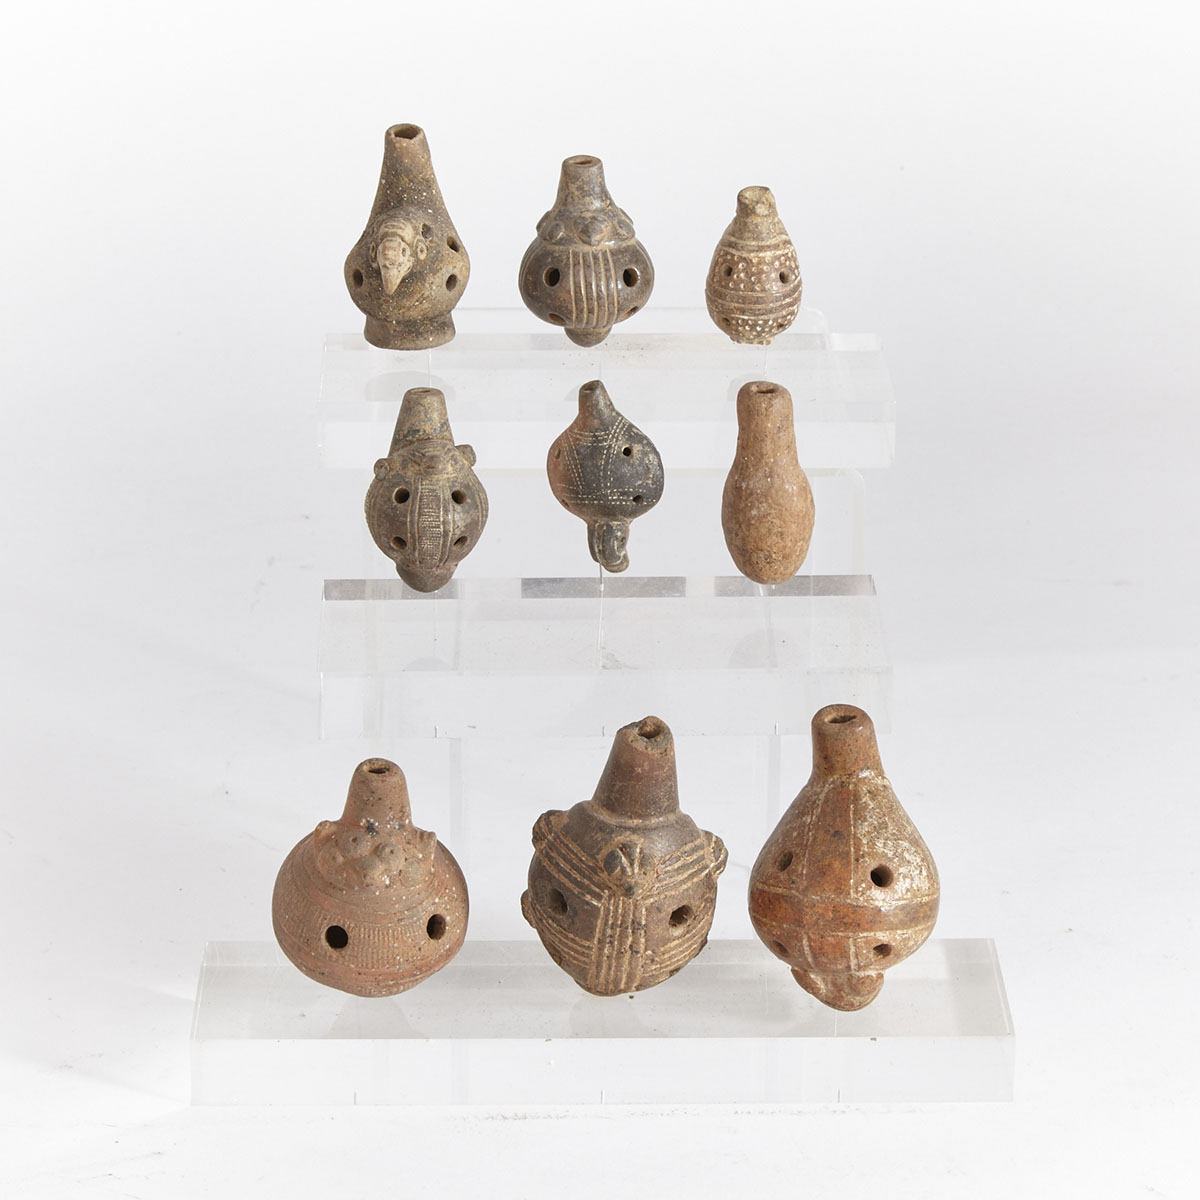 Group of Nine Guanacaste Animal Form Ocarinas and a Whistle, Classic Period, 300 B.C. - 300 A.D.